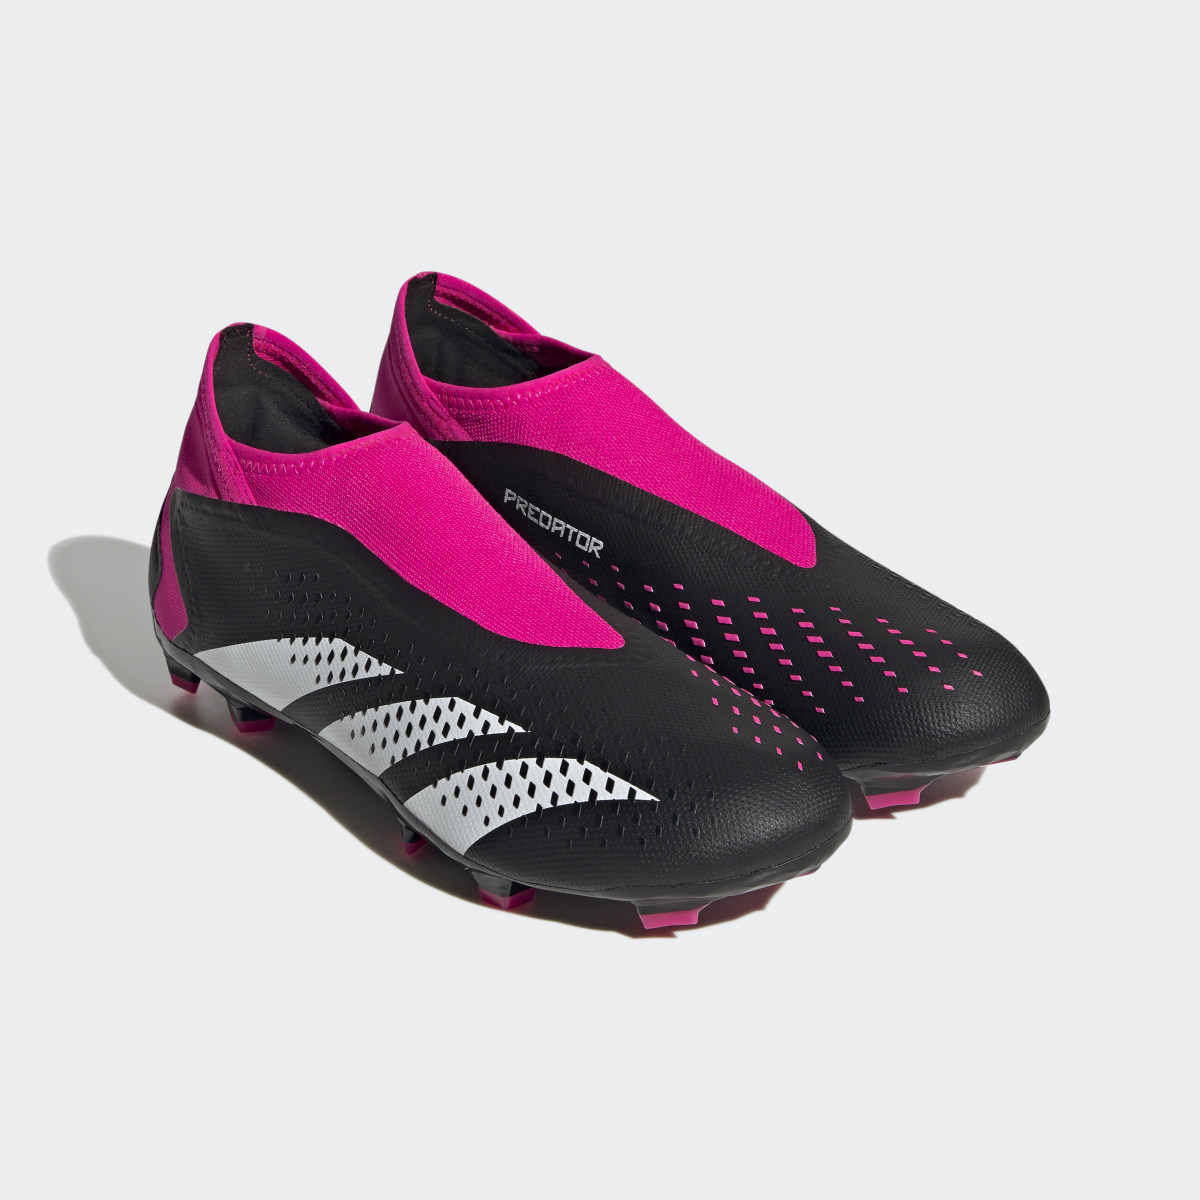 Adidas Predator Accuracy.3 Laceless Firm Ground Boots. 13